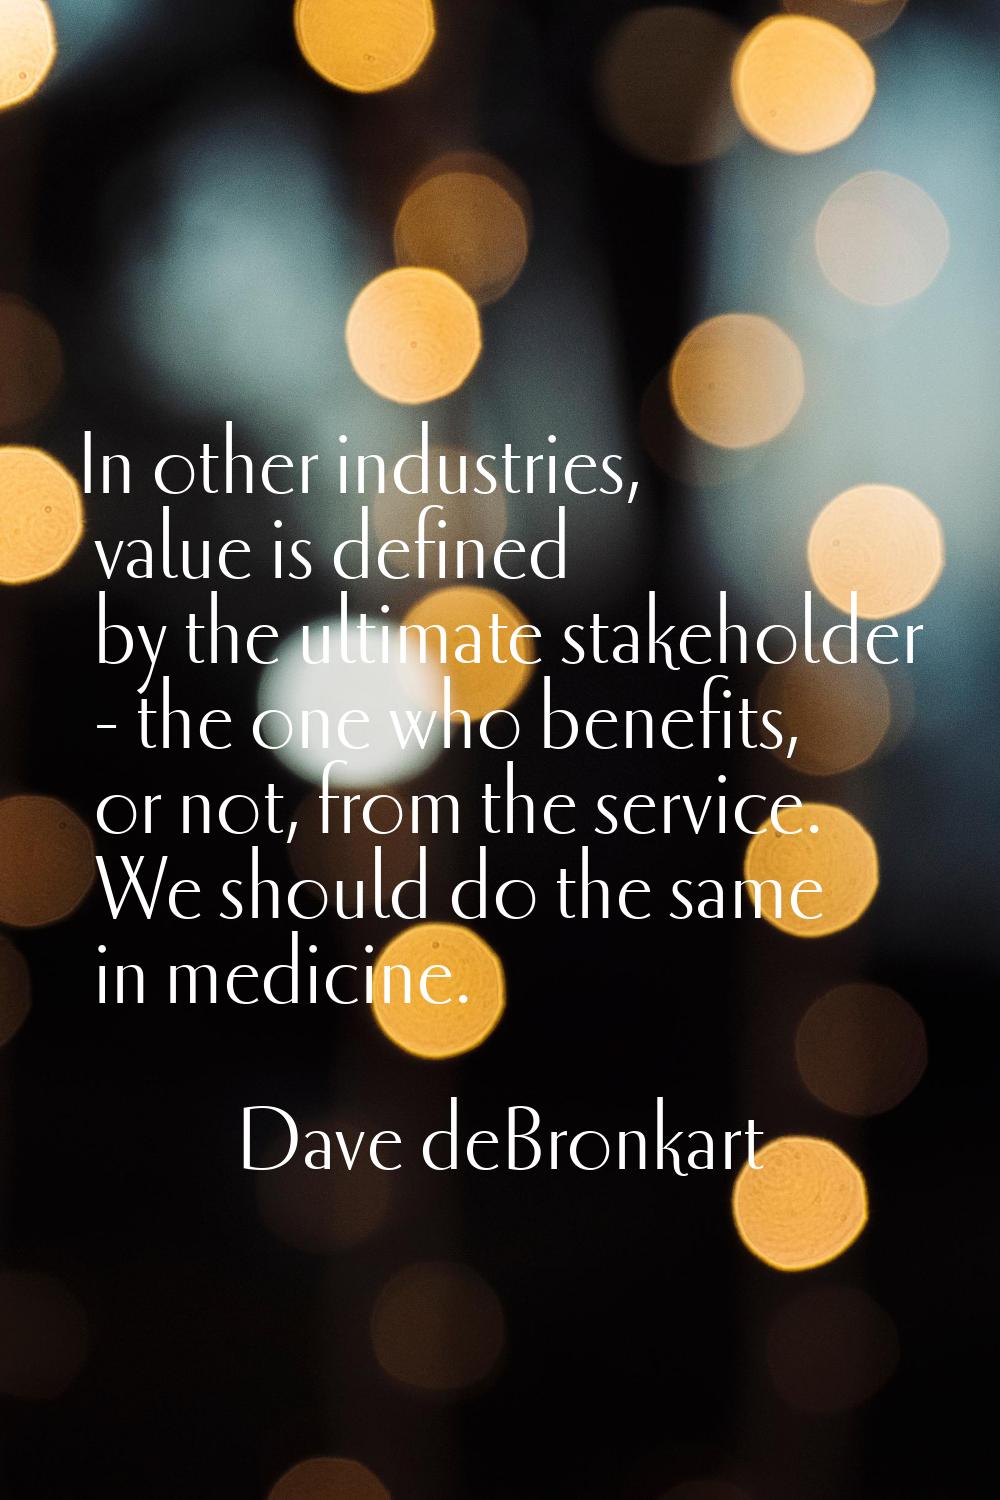 In other industries, value is defined by the ultimate stakeholder - the one who benefits, or not, f